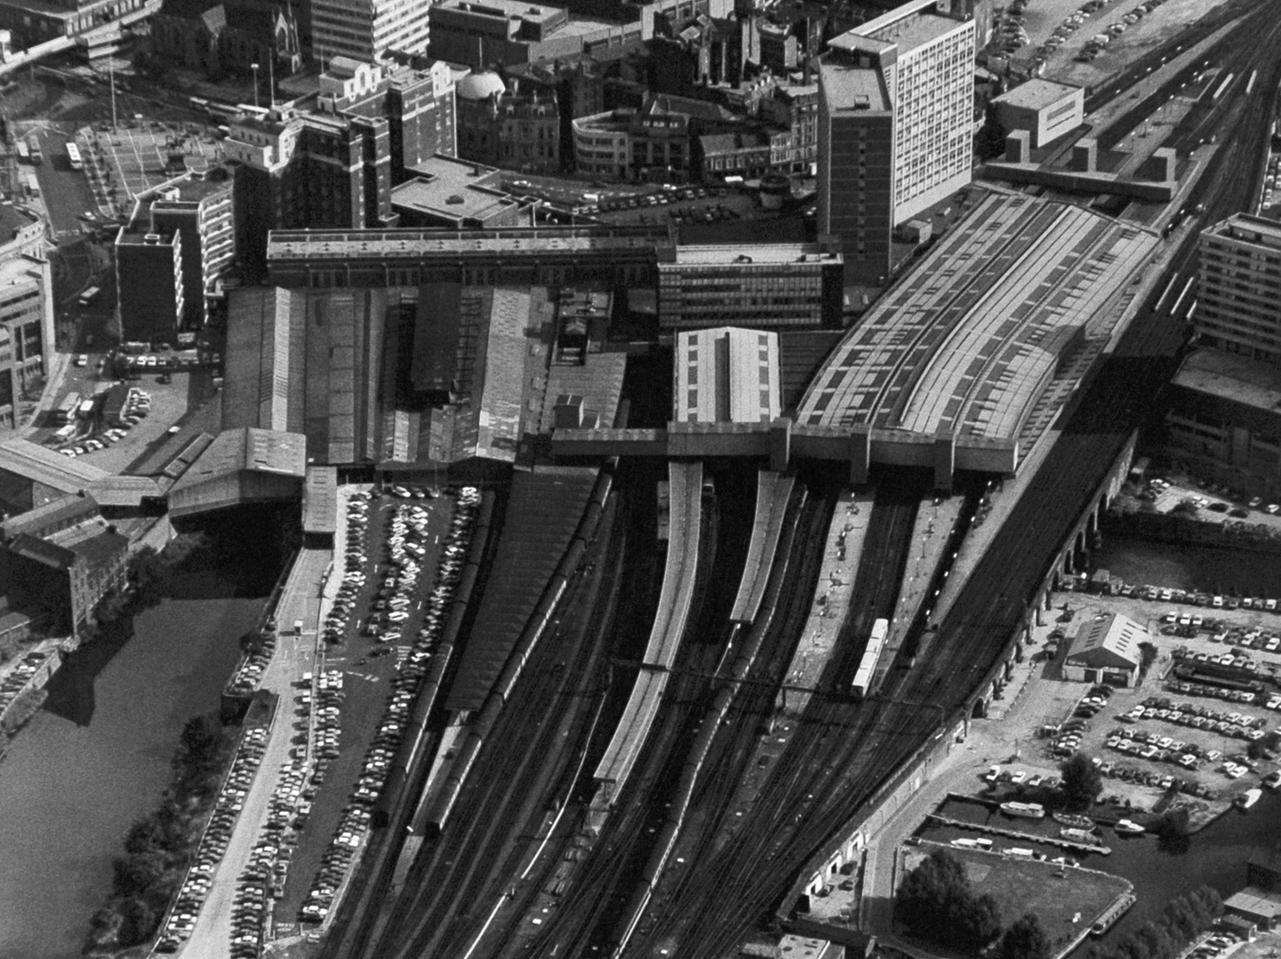 An aerial view of Leeds City Station.